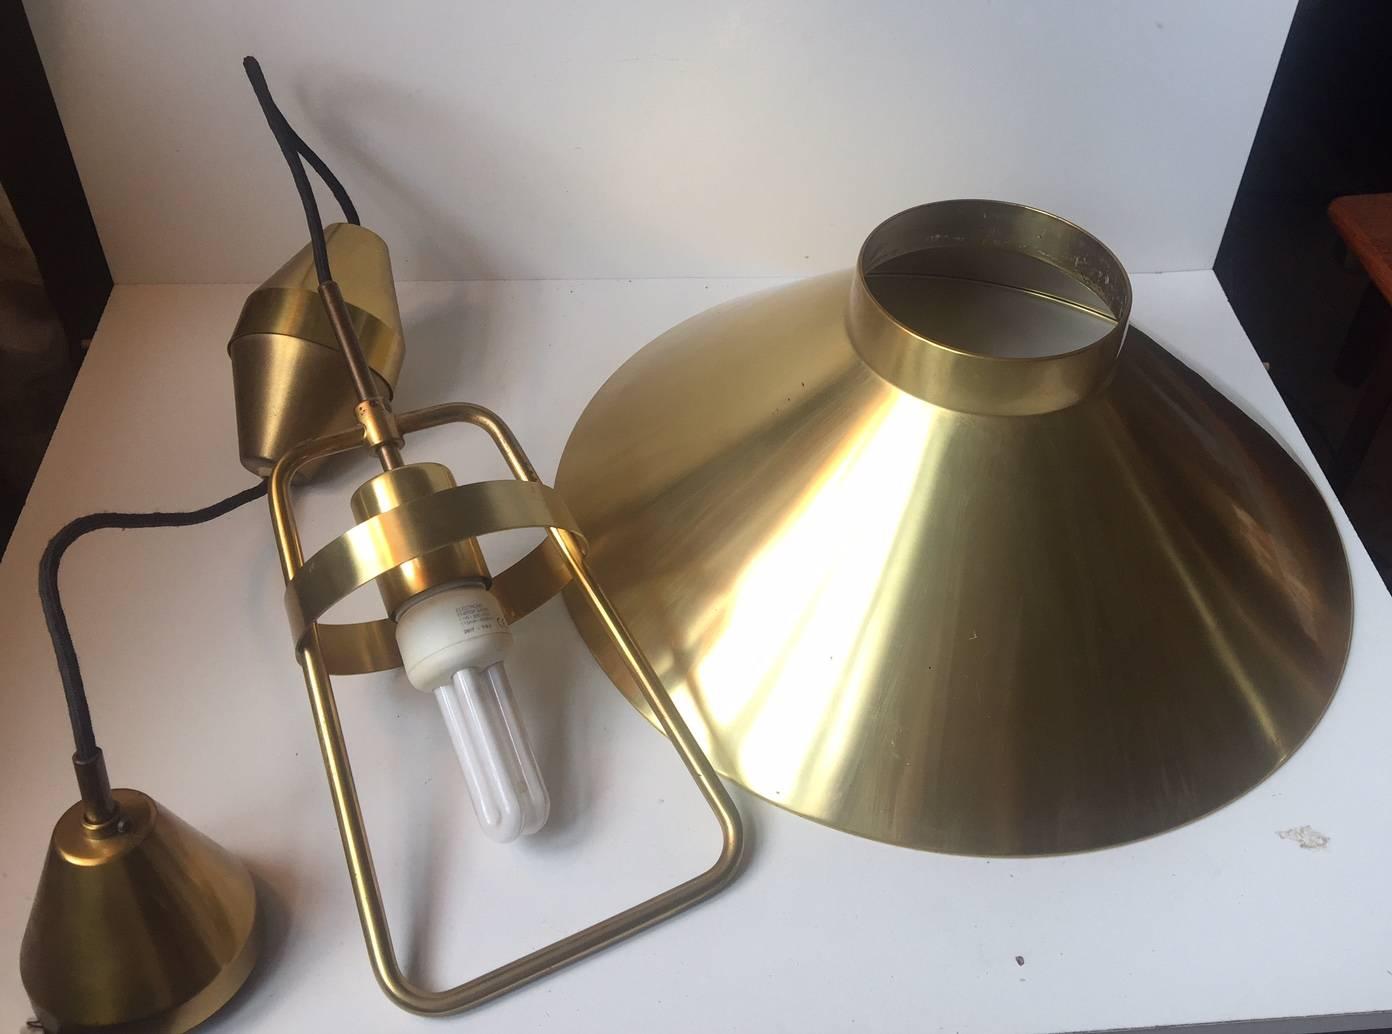 - Solid brass pendant by Fritz Schlegel
- Manufactured by Lyfa in Denmark in the mid-1960s
- Brass mounting bracket with adjustable height and original matching brass canopy
- Model P 295.